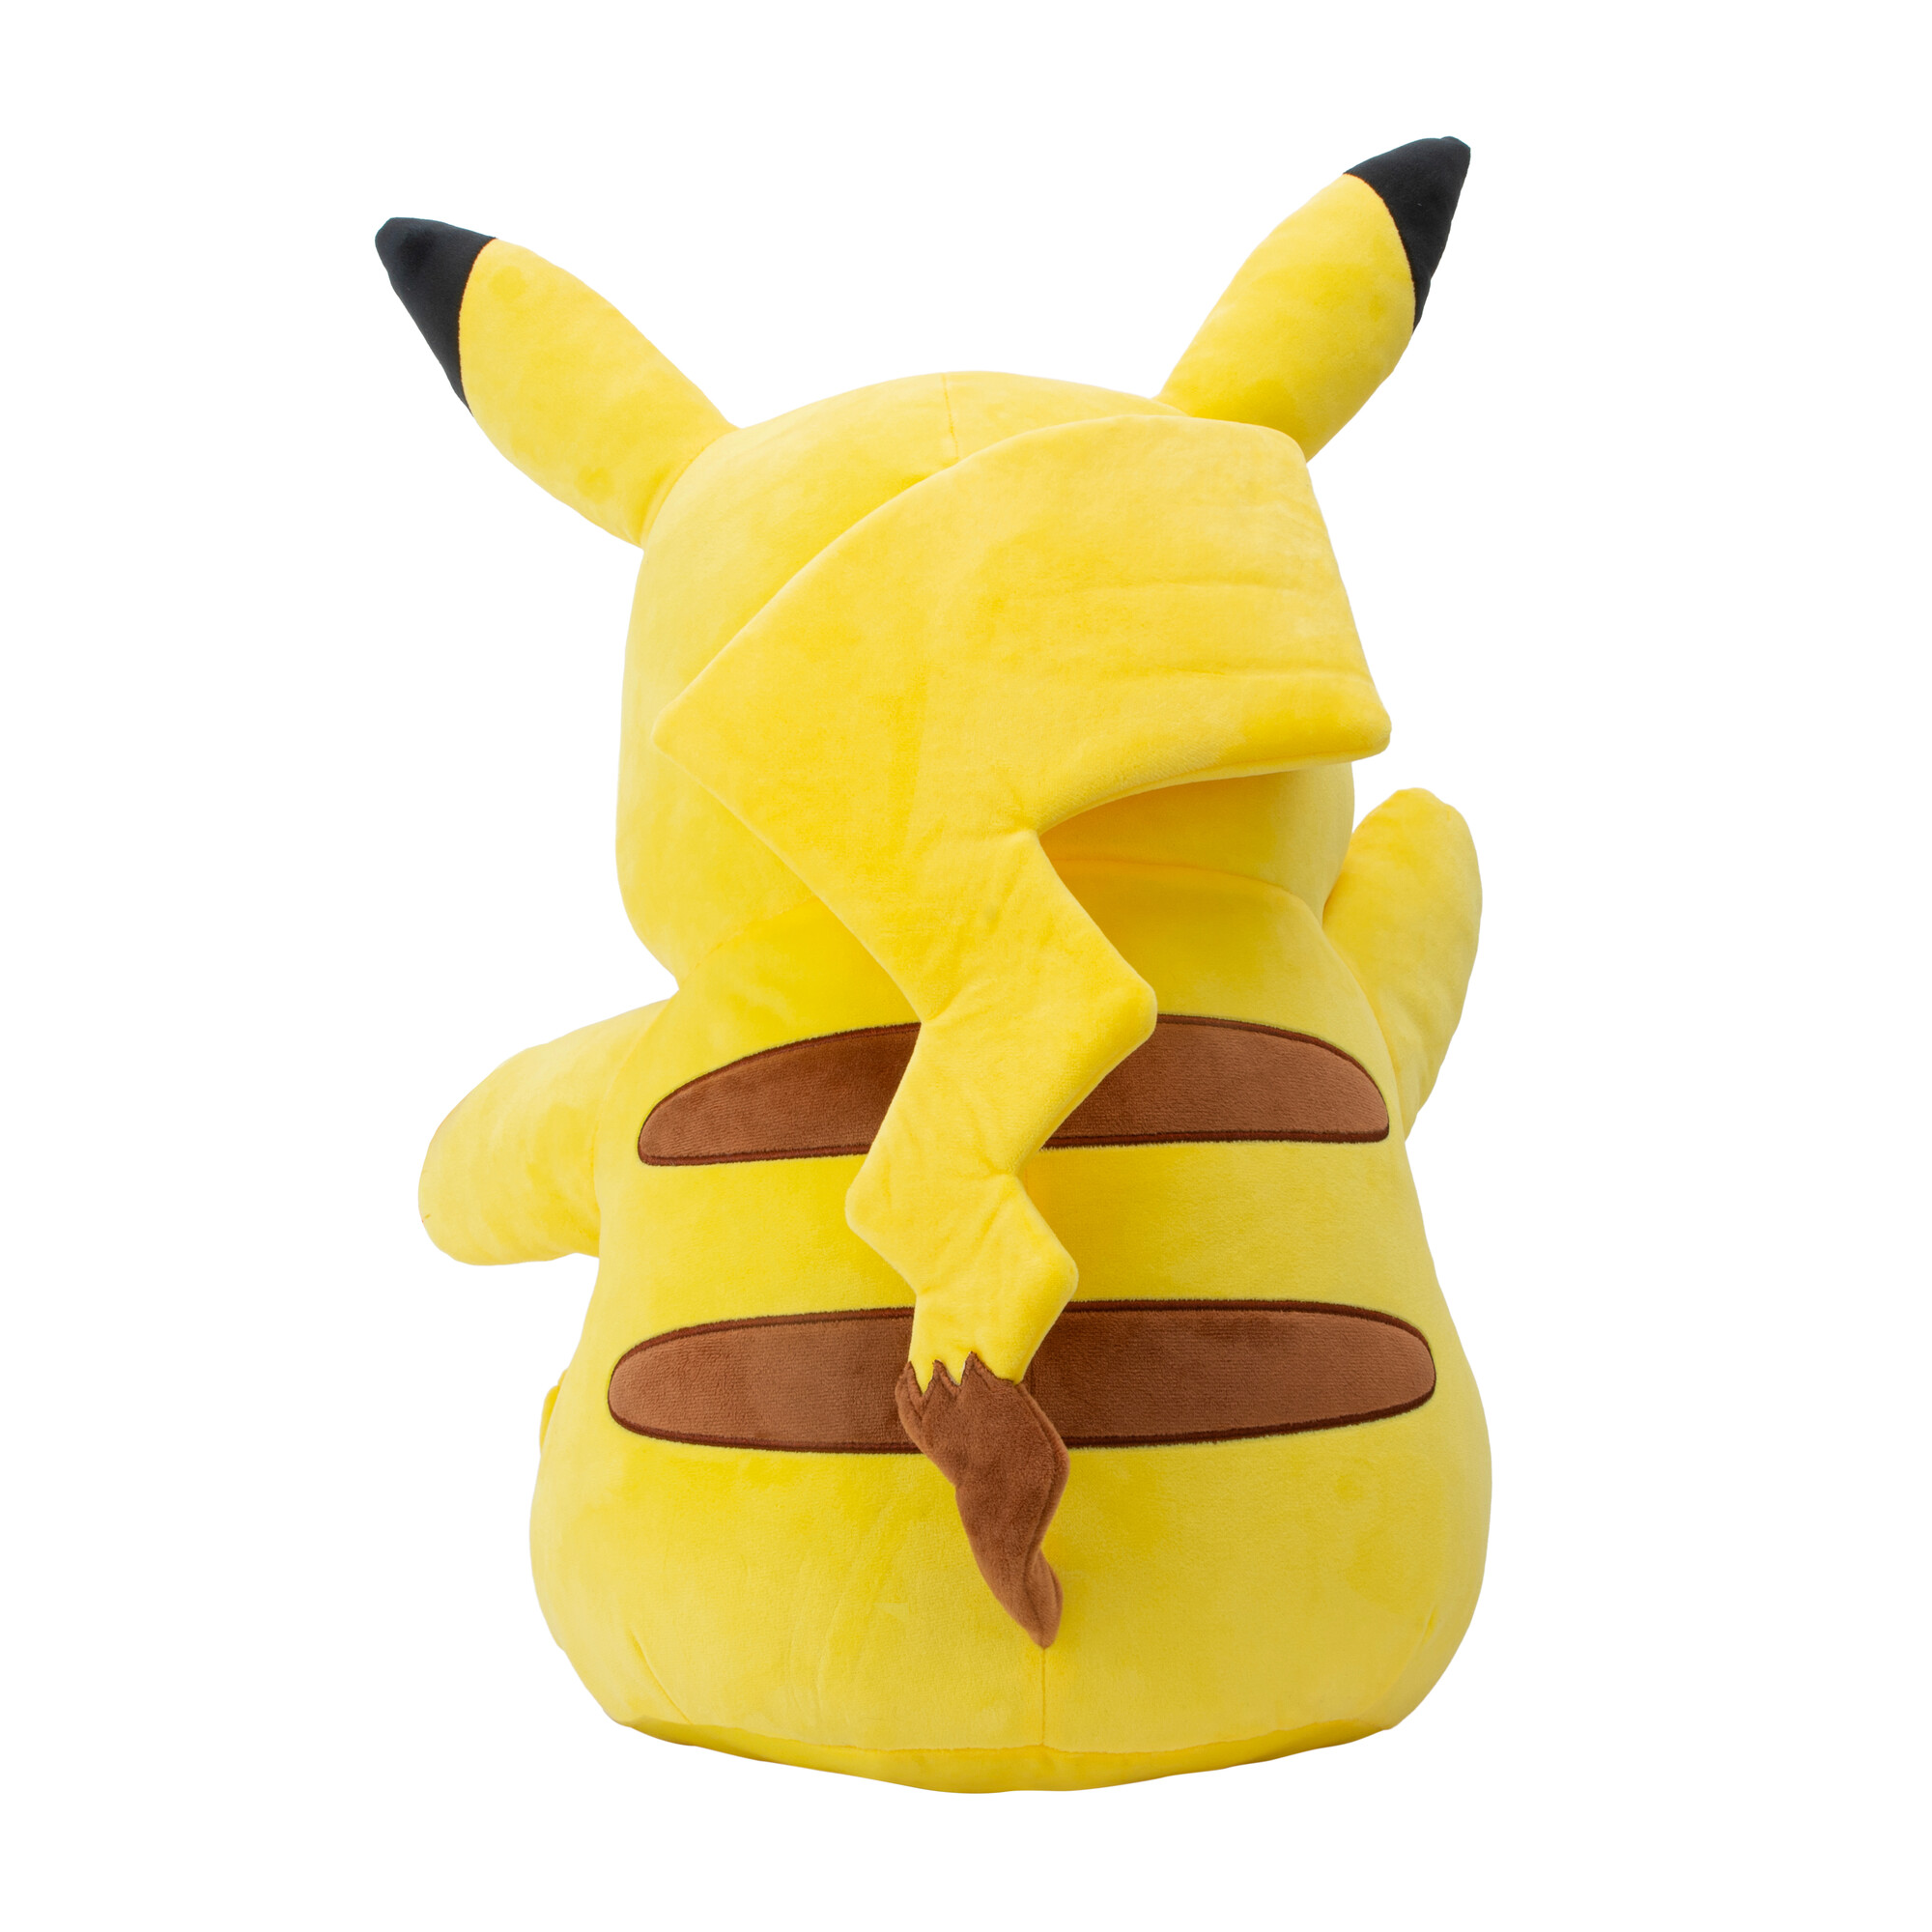 Pokemon Pikachu Plush - 24-inch Child's Plush with Authentic Details - image 2 of 5